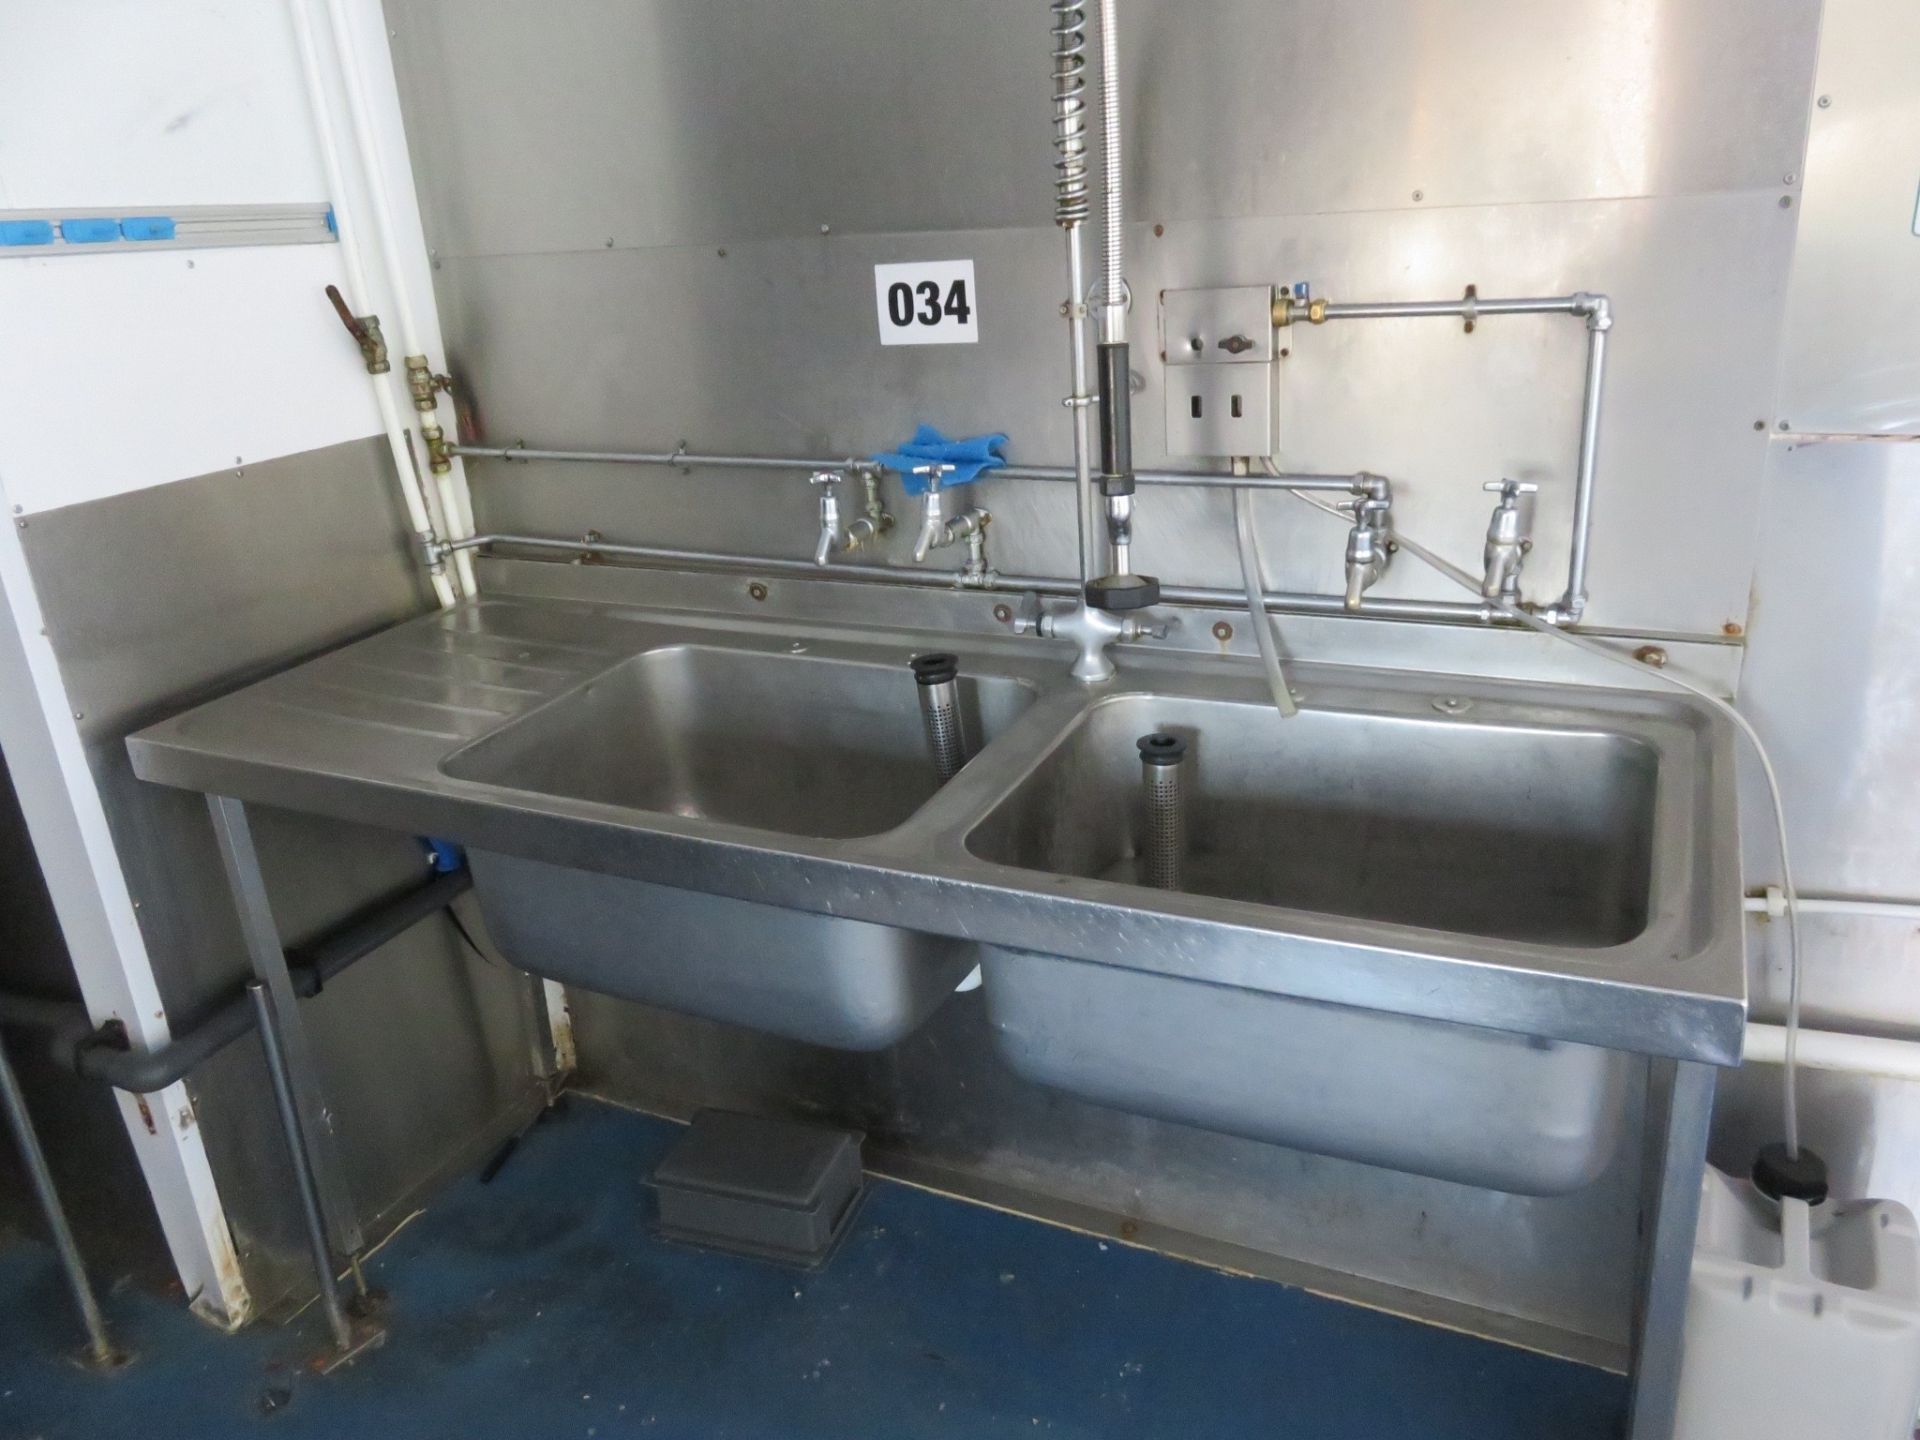 S/s Double Sink with drainer with shower tap. each sink 600 x 450 x 300mm deep. LO £30